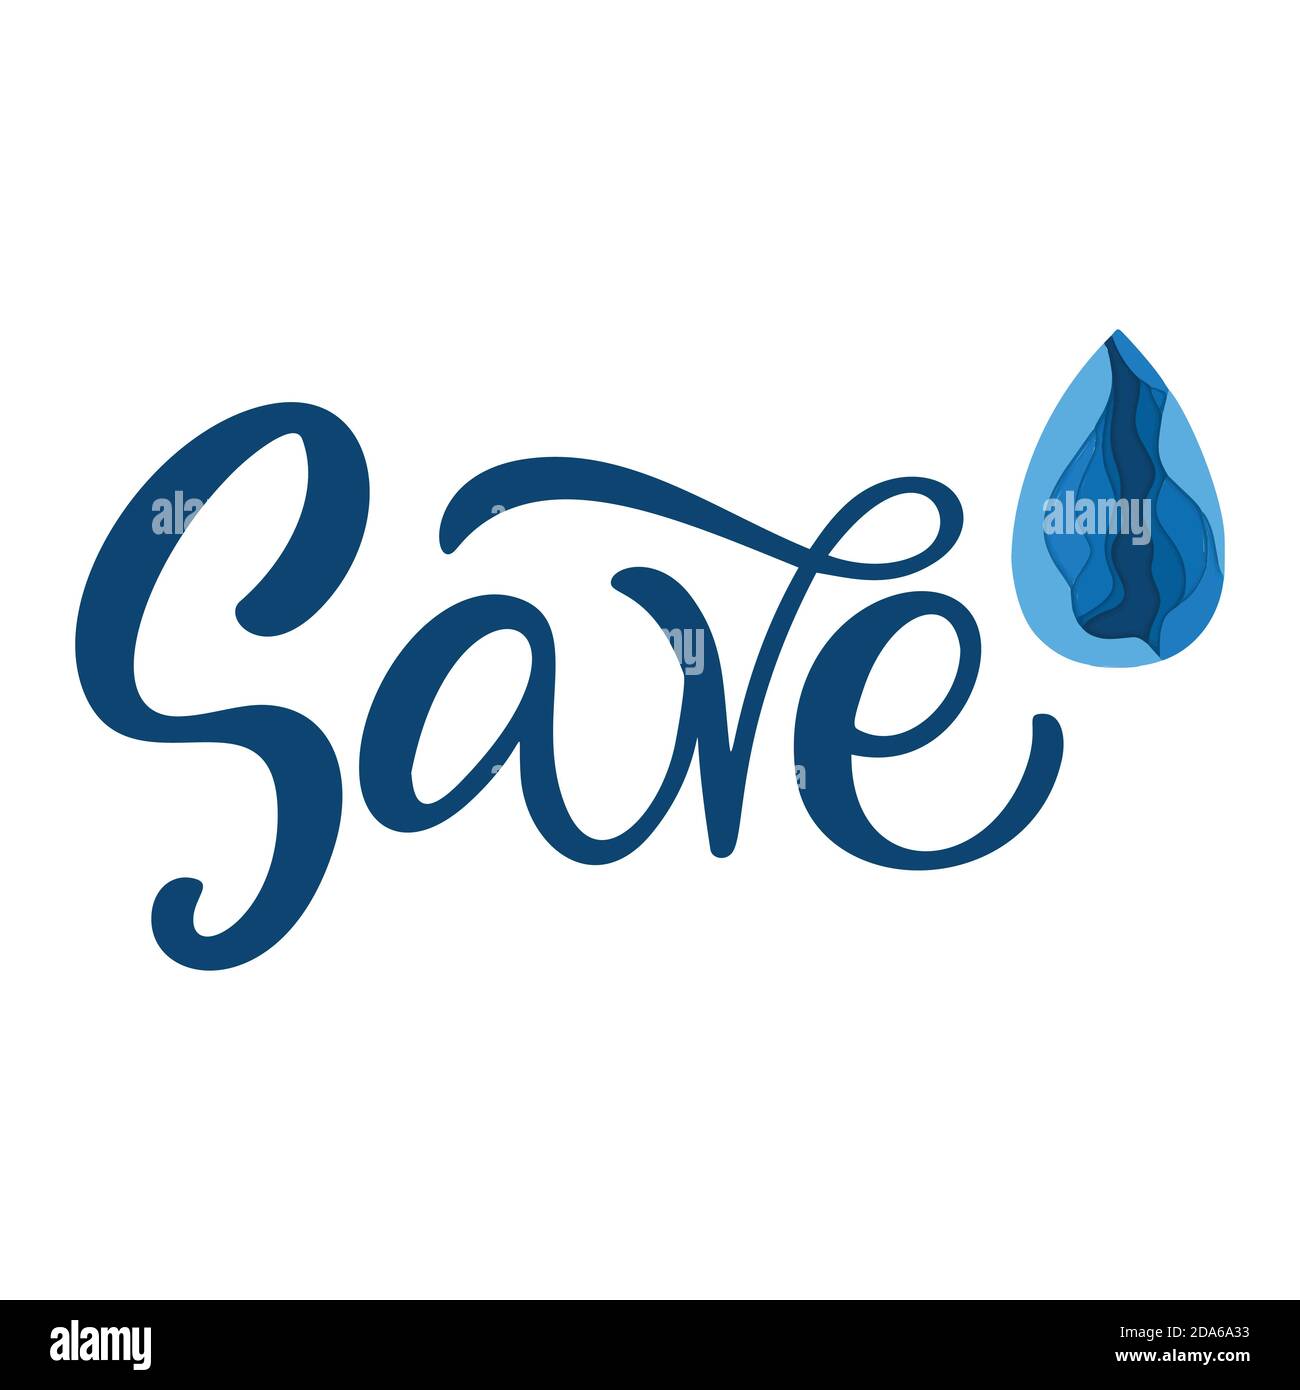 Save water. Drop in papercut style and handlettering design template. Vector elements for banner, t-shirt, mug, poster, bags, Stock Vector